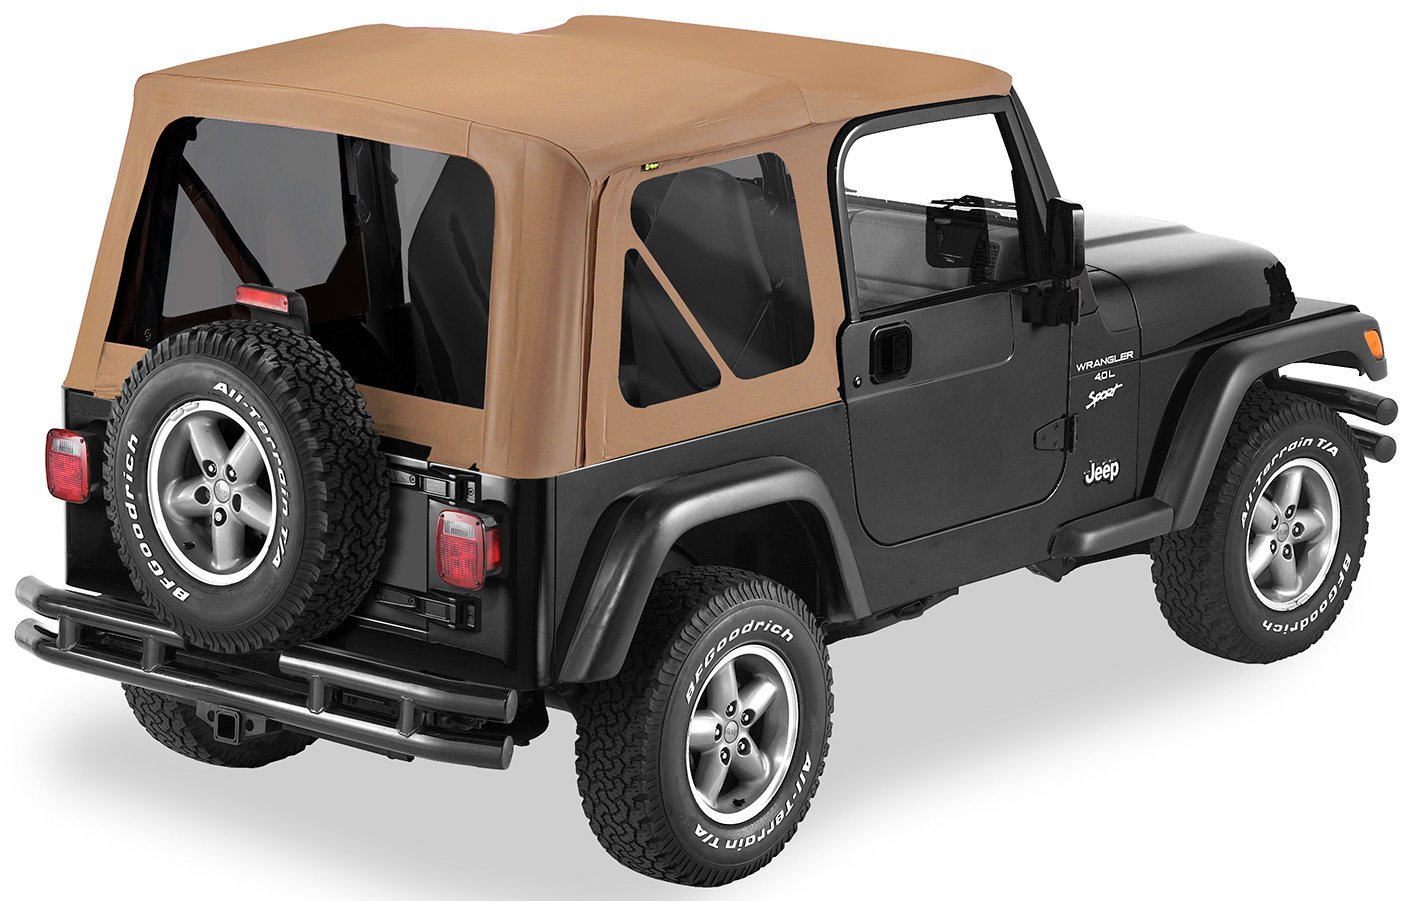 Bestop 79139-37 Sailcloth Replace-a-top Soft Top with Tinted Windows in  Spice for 97-06 Jeep Wrangler TJ | Quadratec